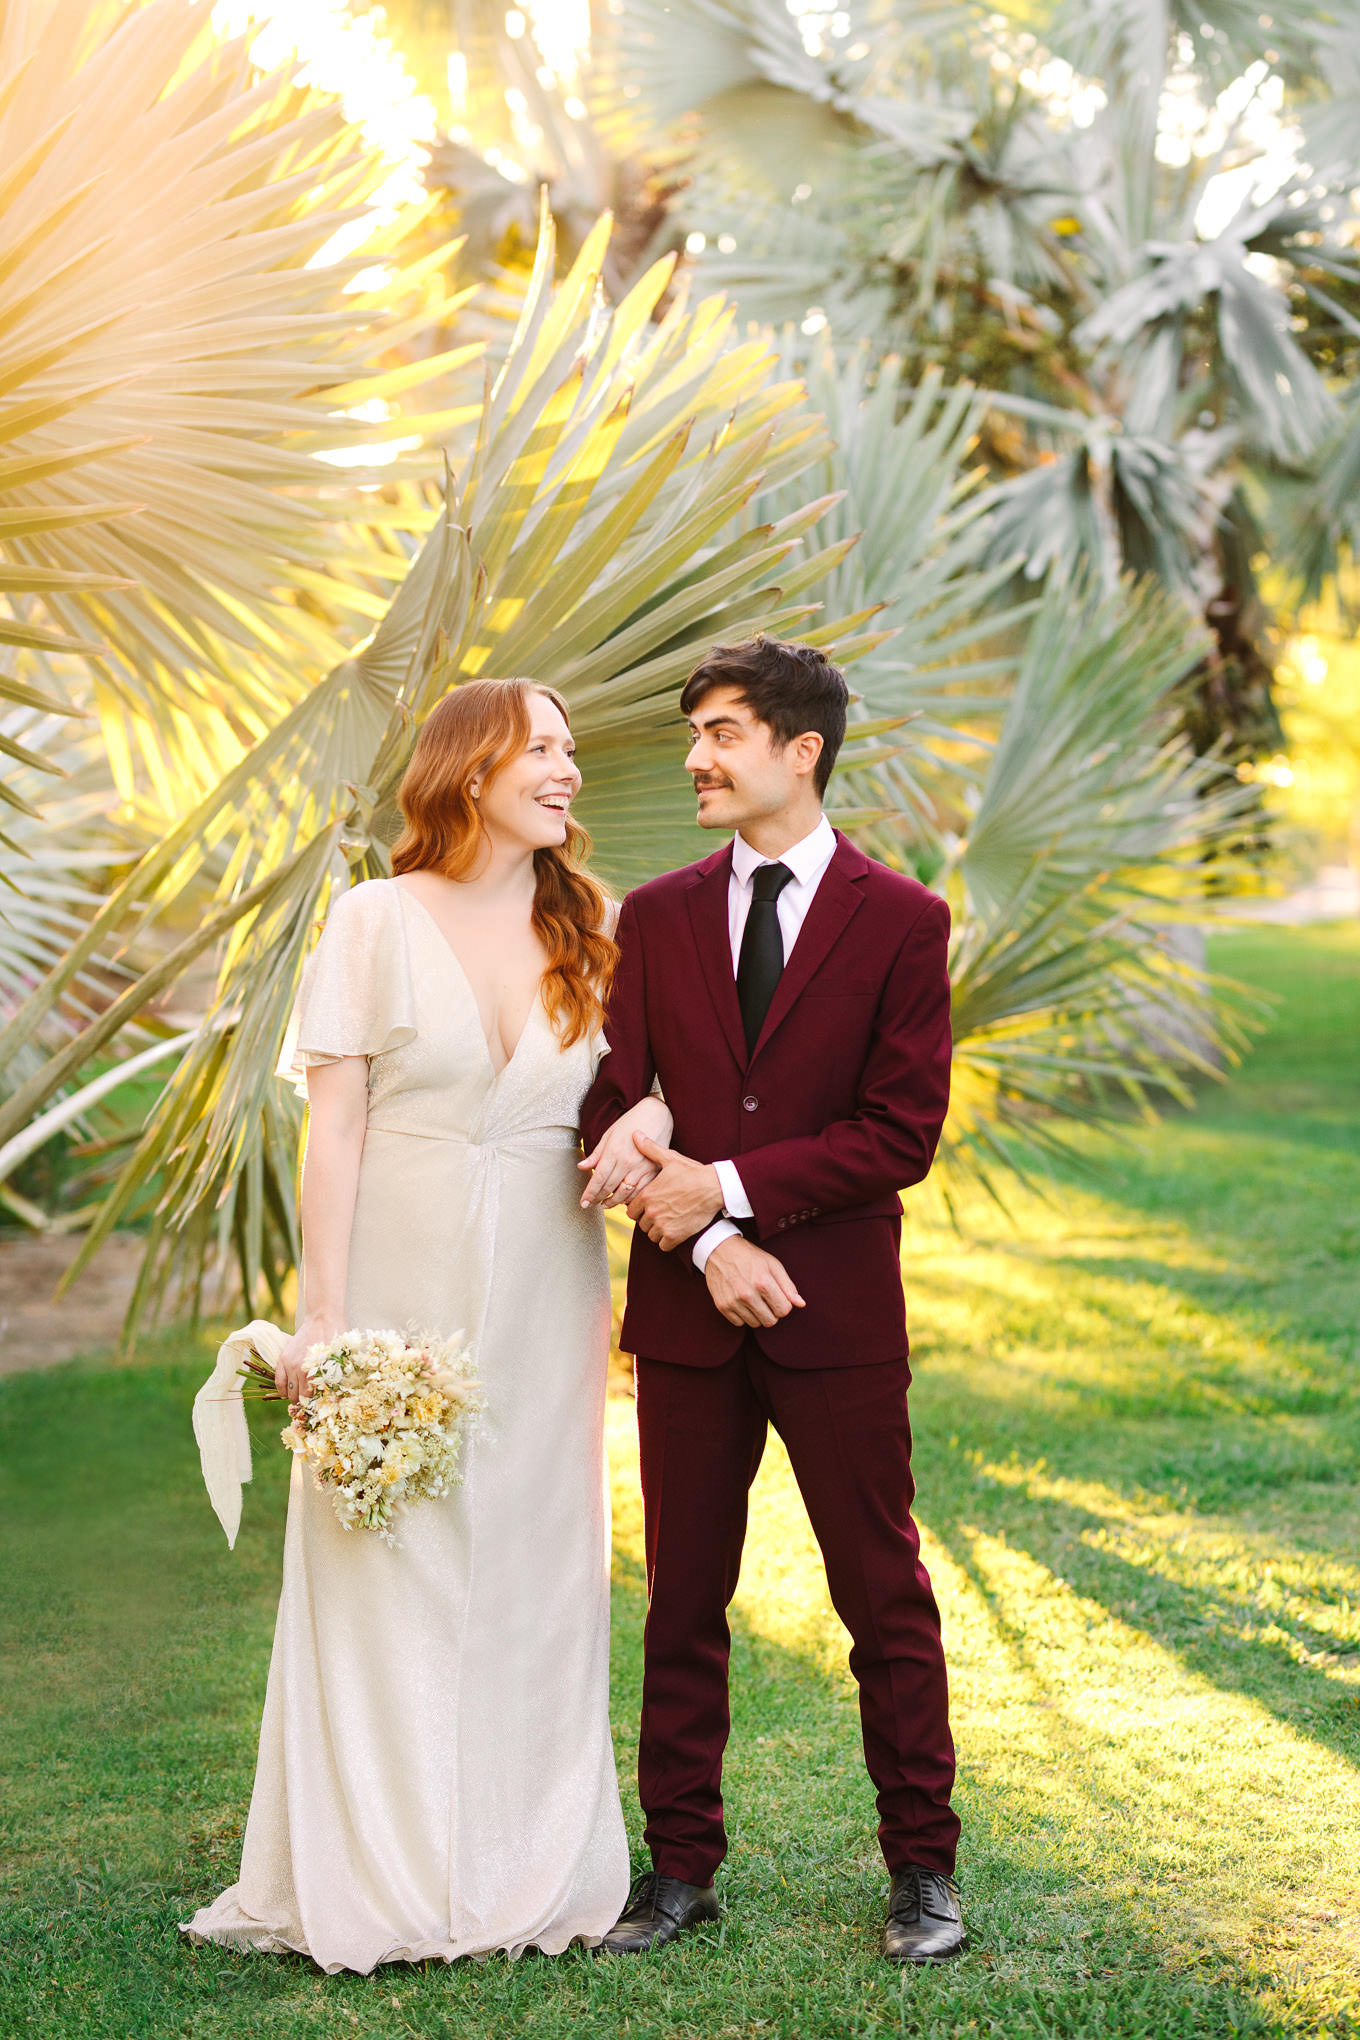 Bride and groom among sunny palm trees | Los Angeles Arboretum Elopement | Colorful and elevated wedding photography for fun-loving couples in Southern California | #LosAngelesElopement #elopement #LAarboretum #LAskyline #elopementphotos   Source: Mary Costa Photography | Los Angeles